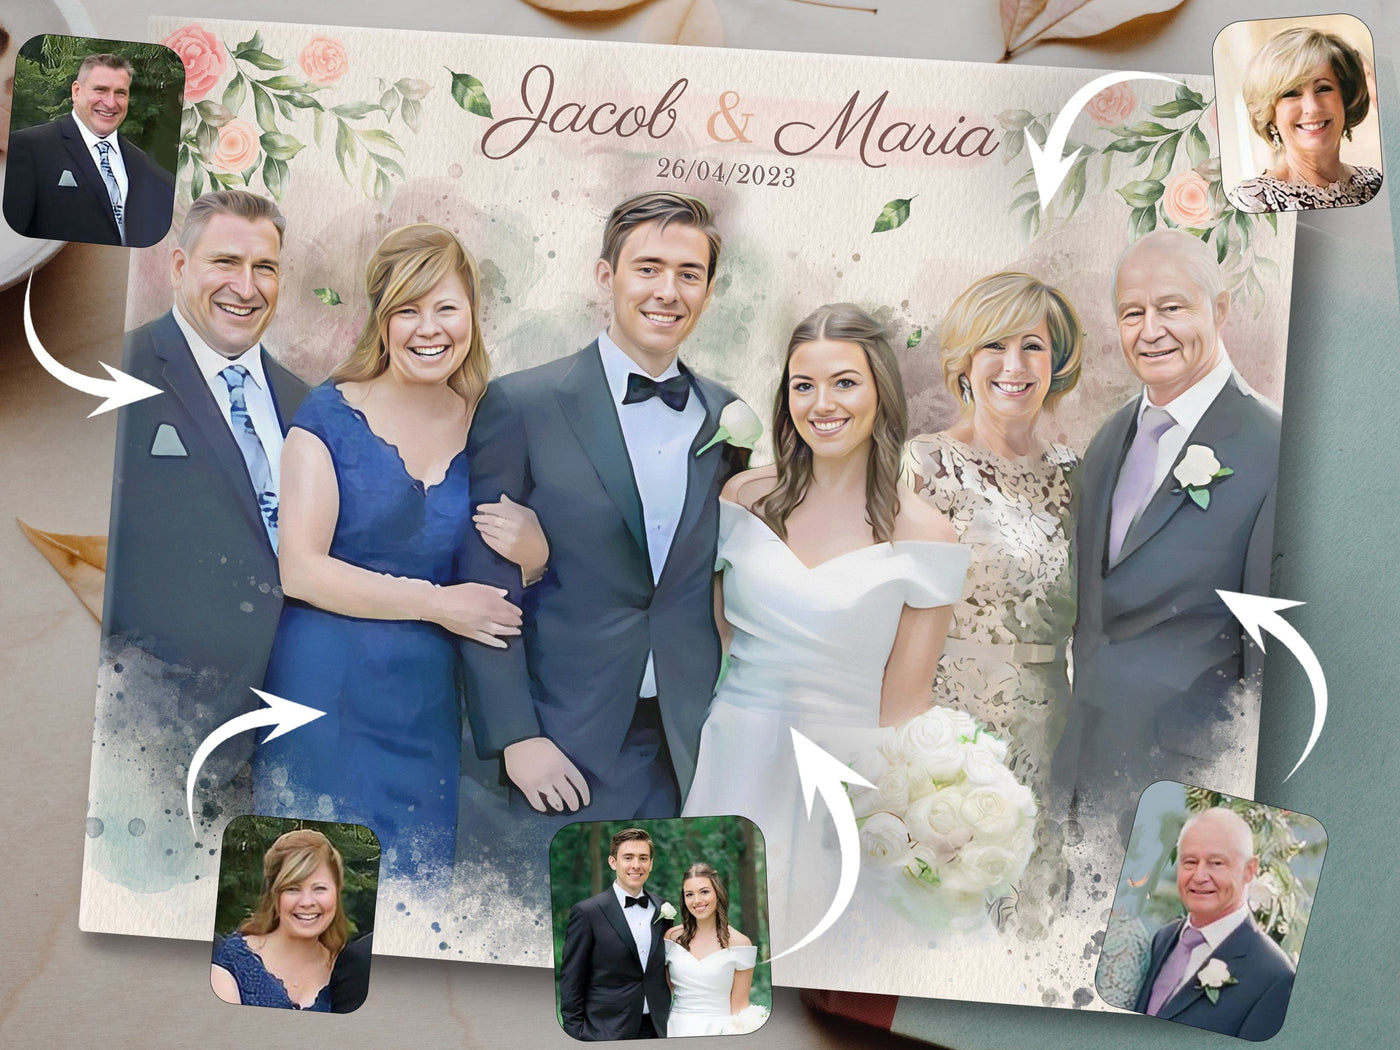 valentines canvas portrait of a lovely family wedding